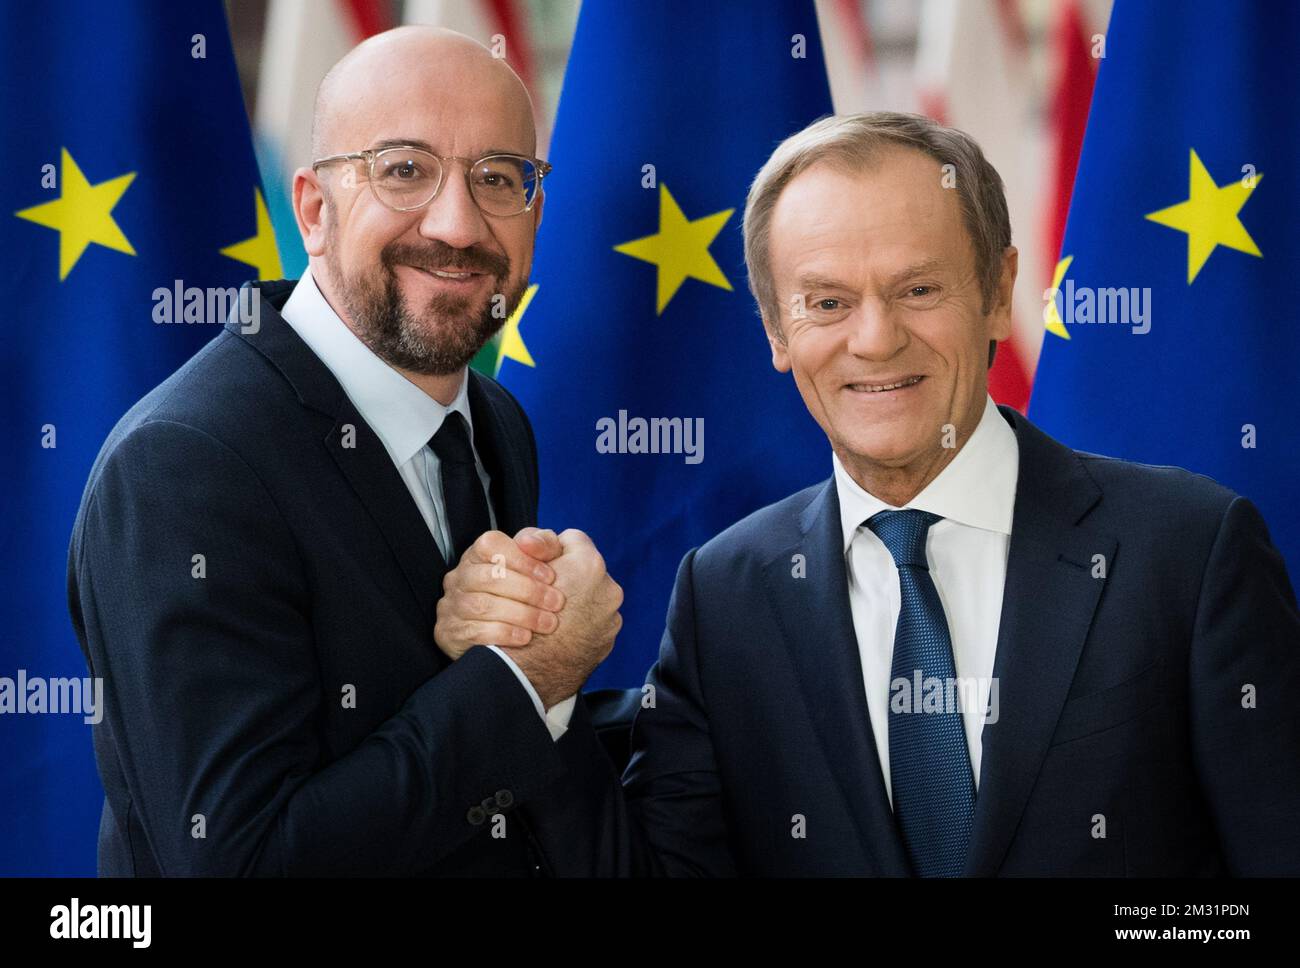 Newly appointed European Council President Charles Michel (L) and outgoing European Council President Donald Tusk pictured during the handover between outgoing President Tusk and incoming President Michel, at the European headquarters in Brussels, Friday 29 November 2019. BELGA PHOTO BENOIT DOPPAGNE Stock Photo